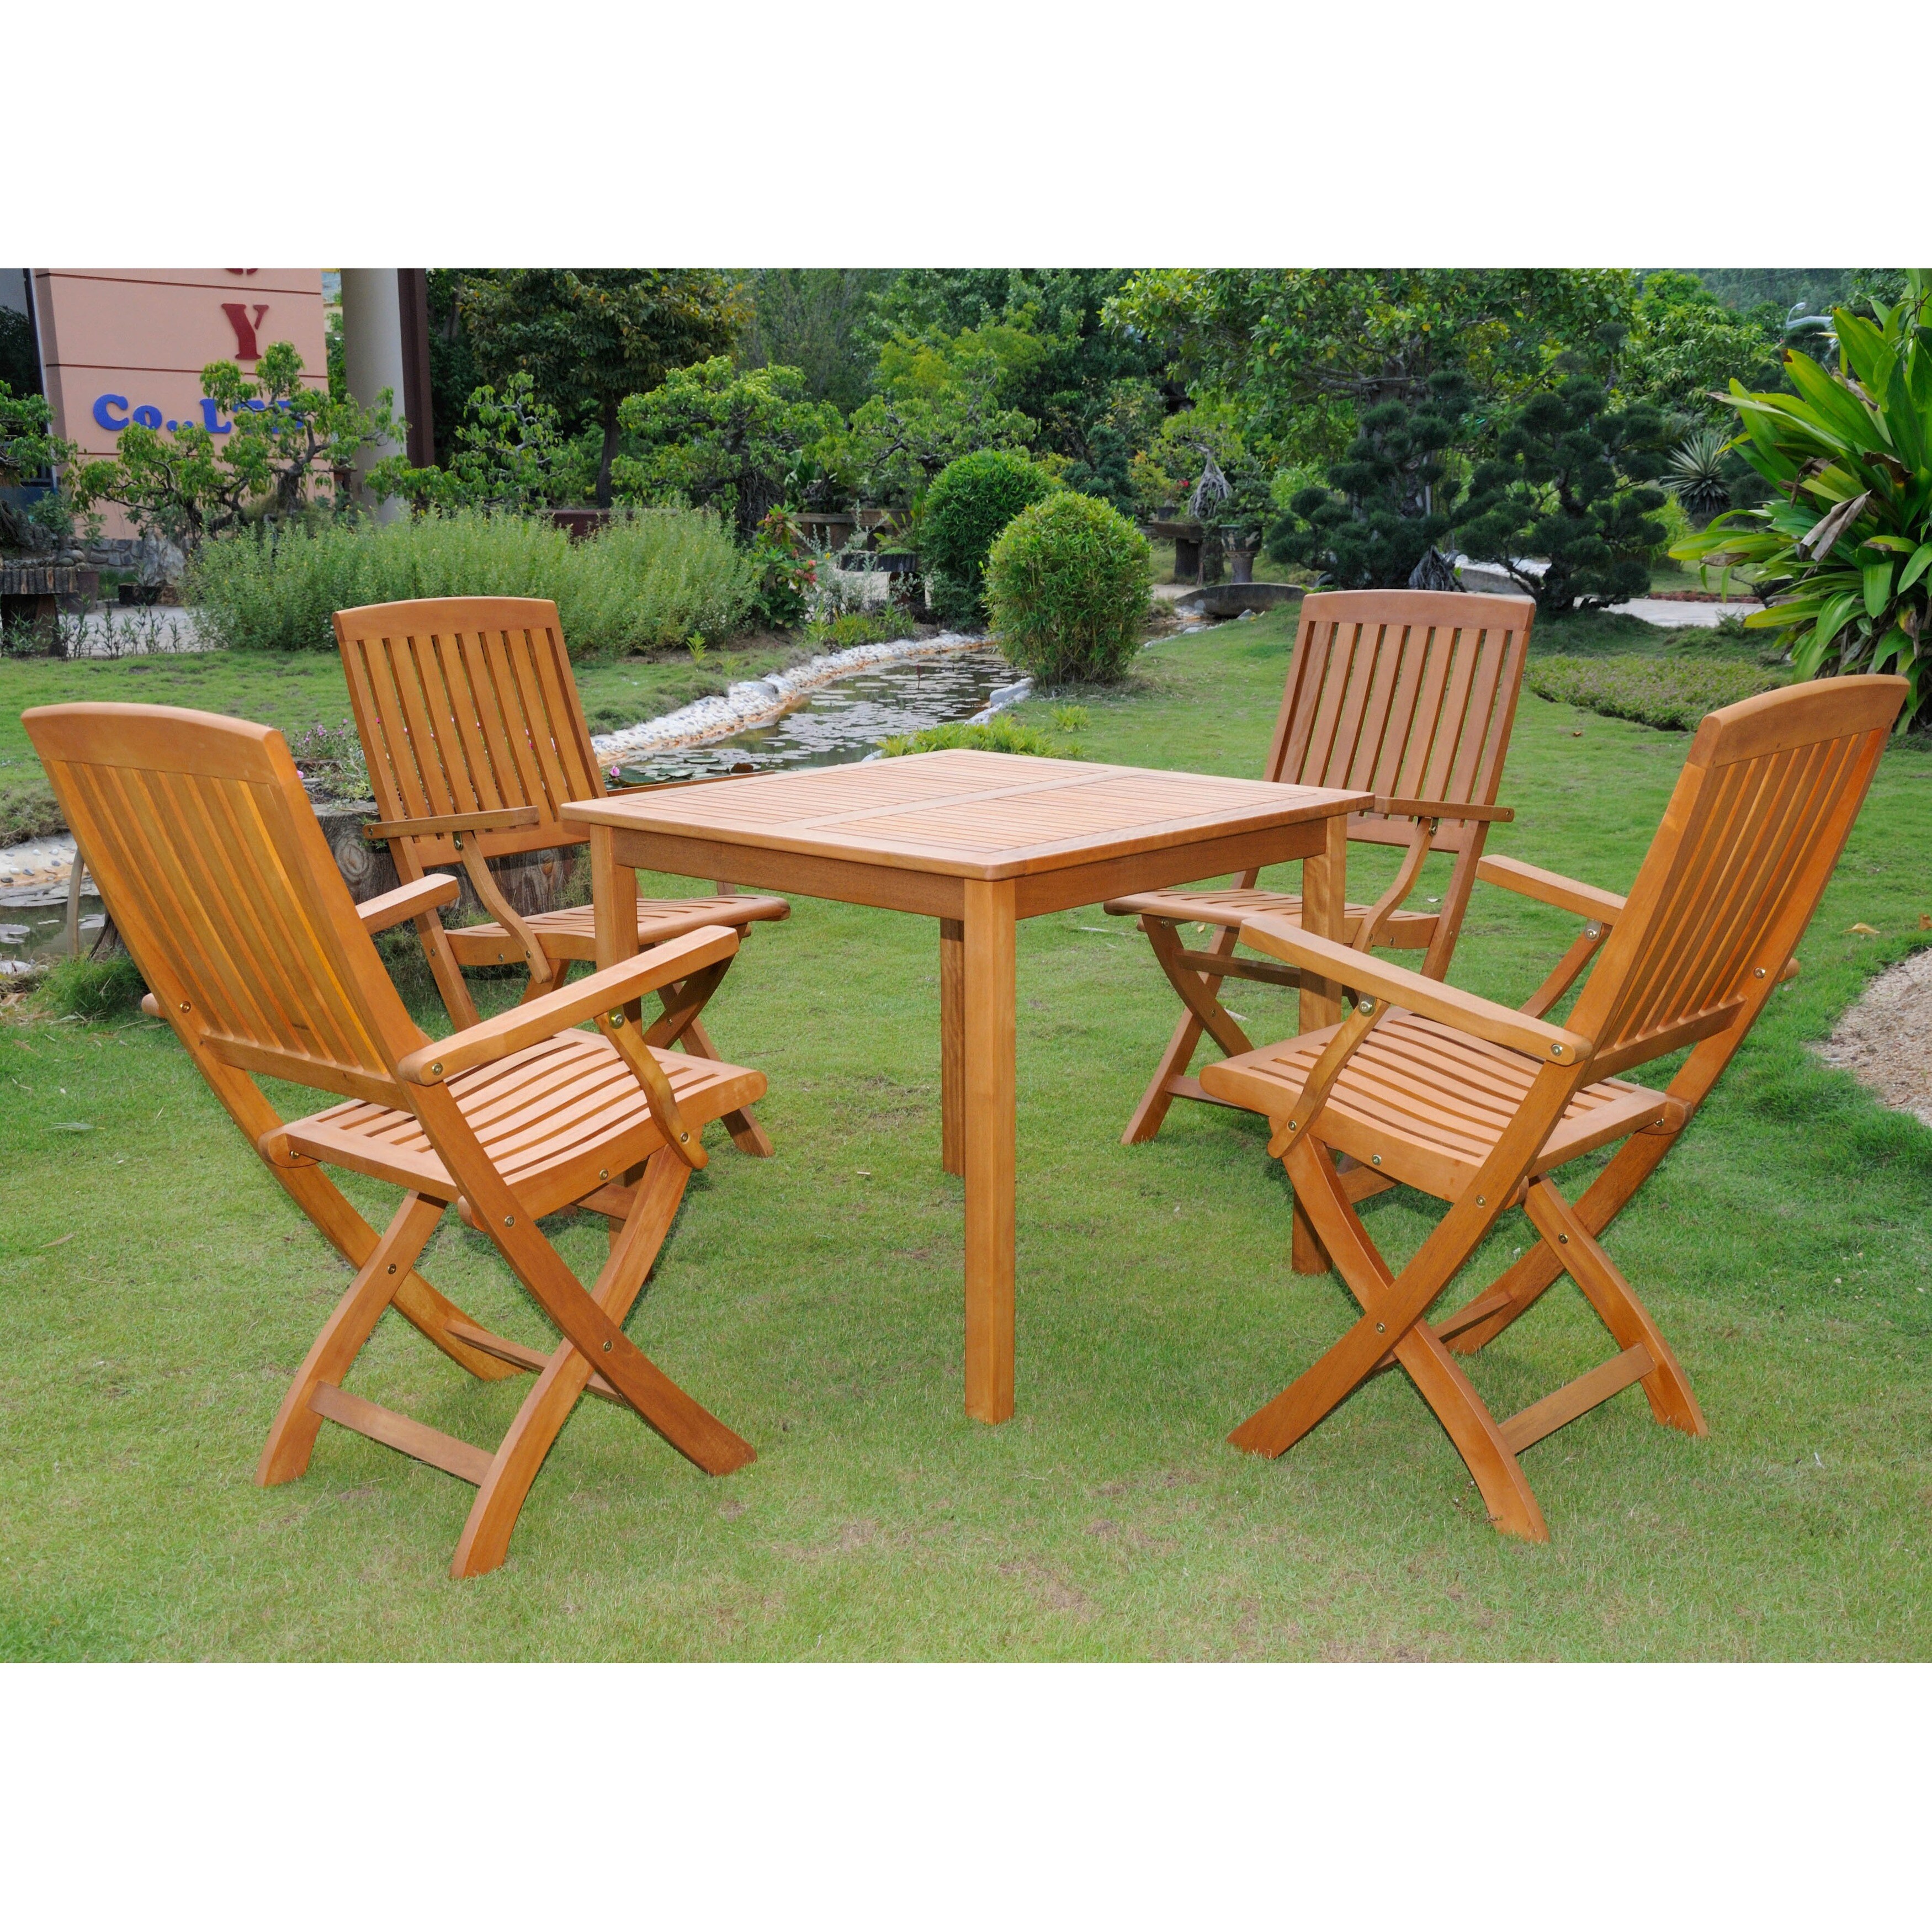 International Caravan Royal Tahiti Benevente 5 piece Outdoor Dining Set (Natural yellow balau wood colorMaterials Yellow balau hardwoodFinish Natural Wood finishWeather resistantUV protectionChairs fold for easy deployment and storageChair dimensions 2